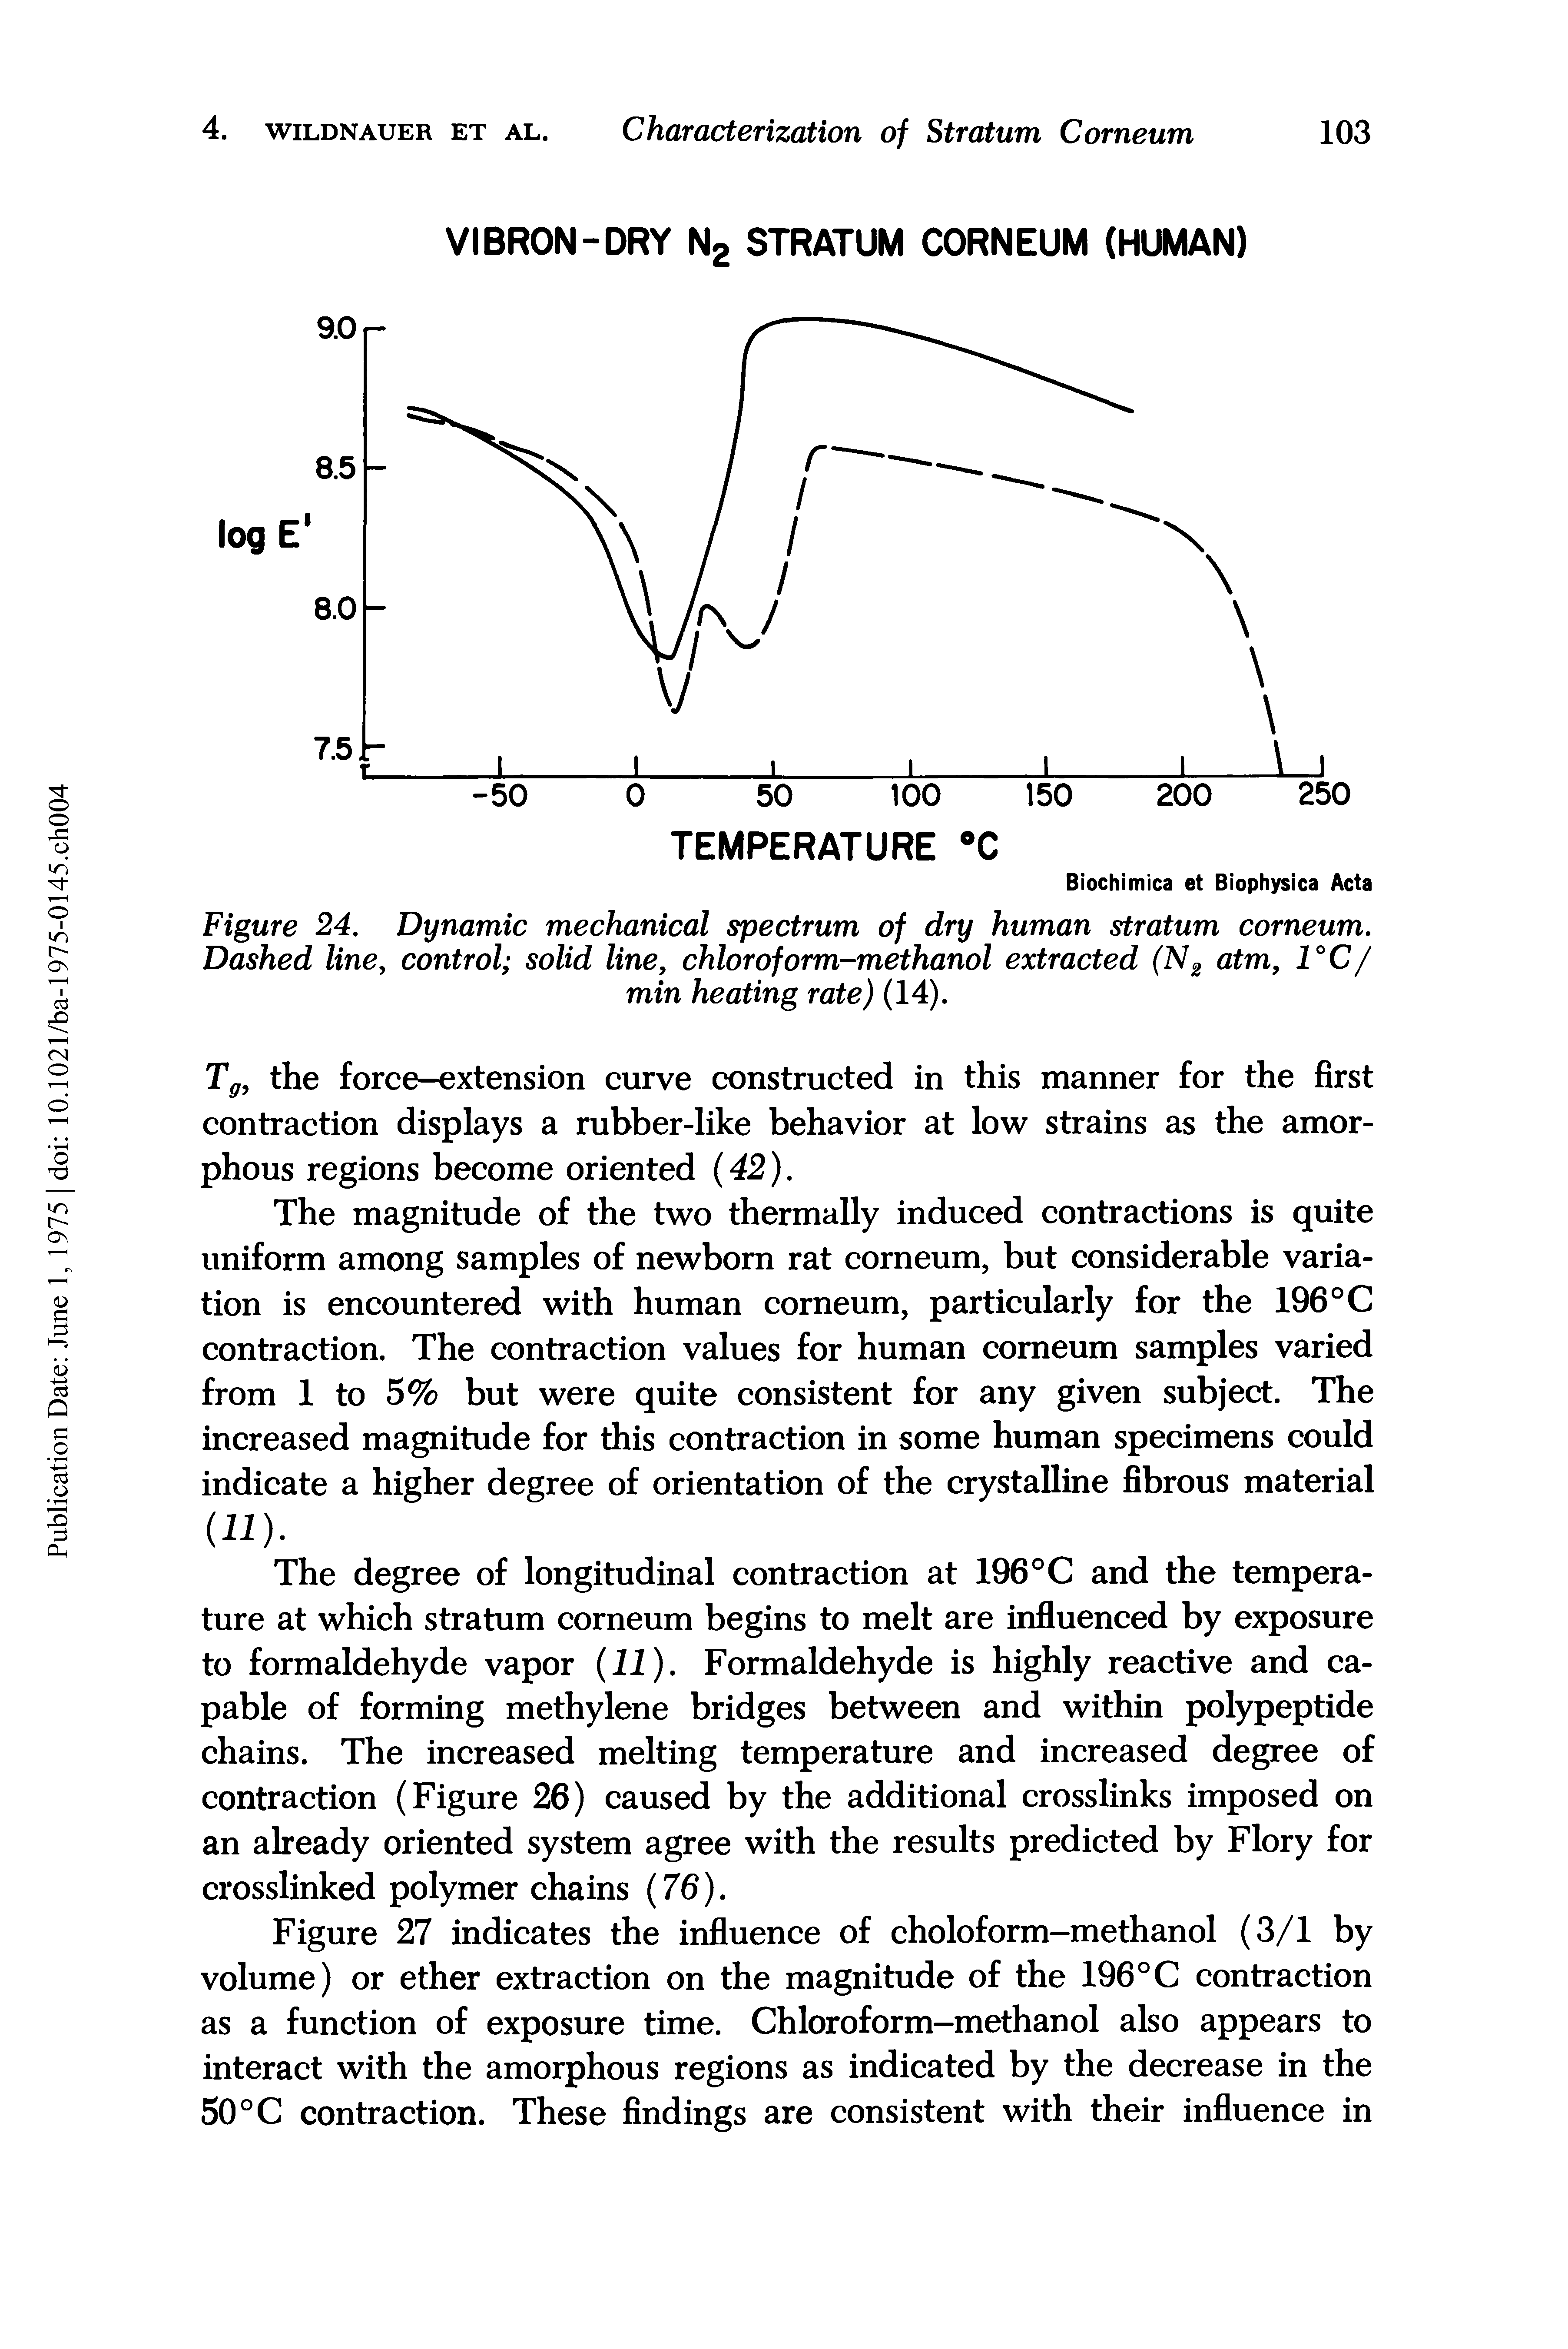 Figure 24. Dynamic mechanical spectrum of dry human stratum corneum. Dashed line, control solid line, chloroform-methanol extracted (N2 atm, 1°C/...